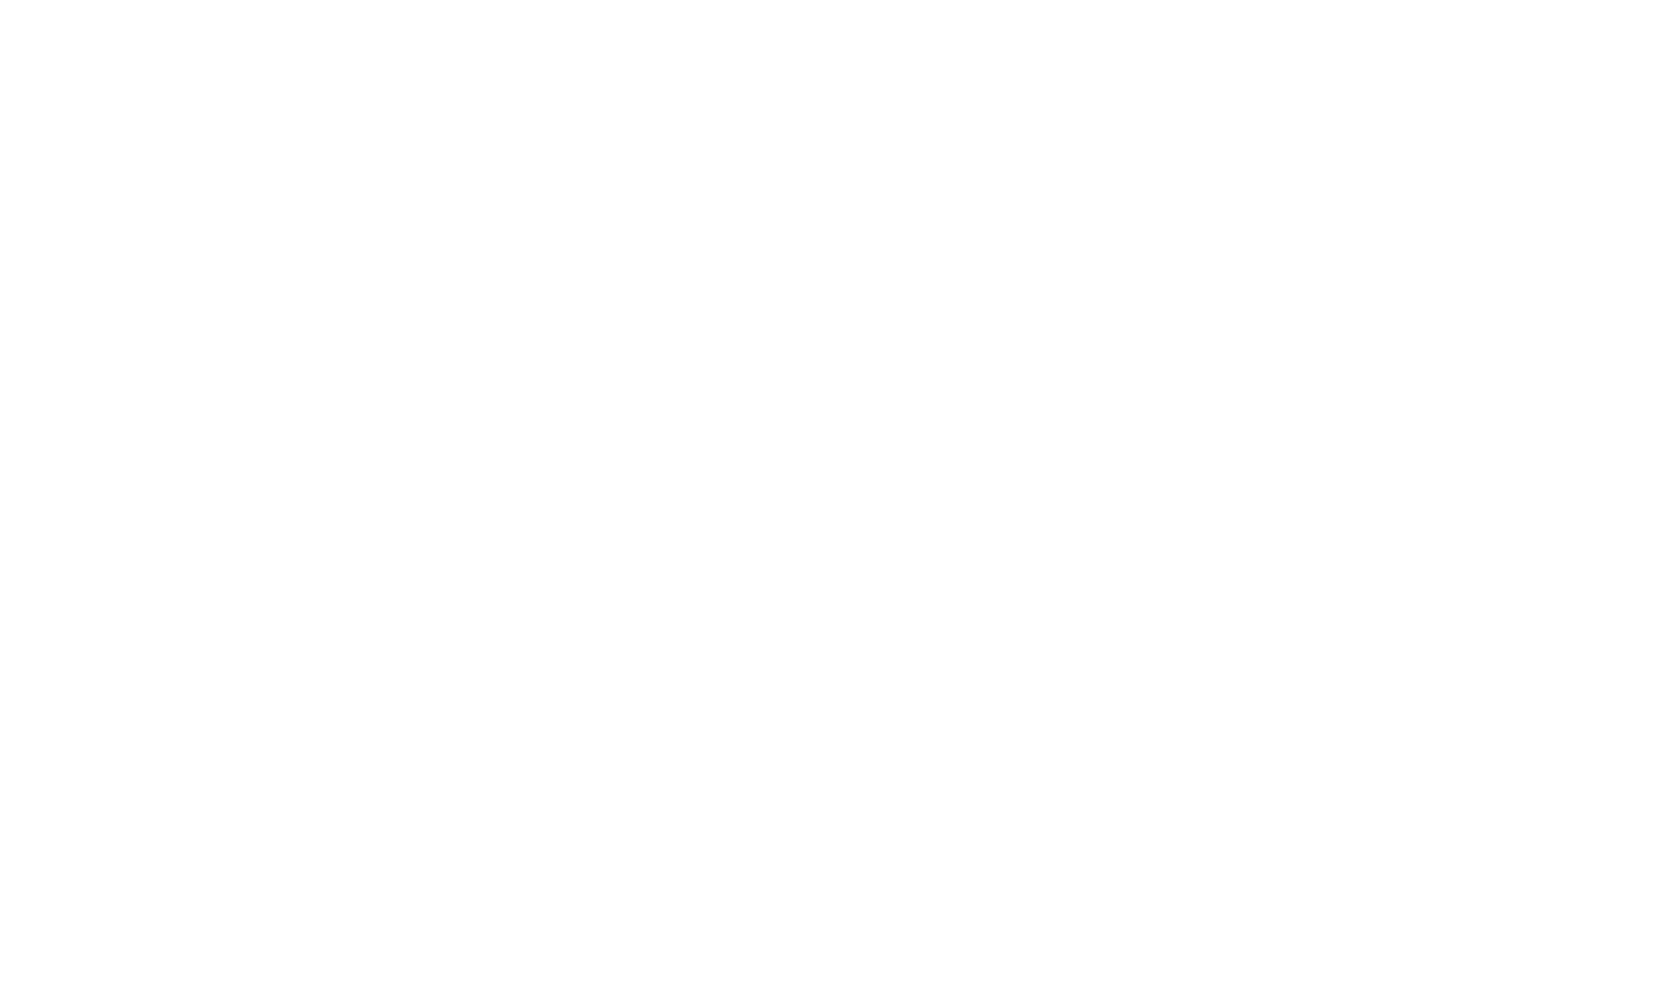 Wallace Global Fund Logo.png